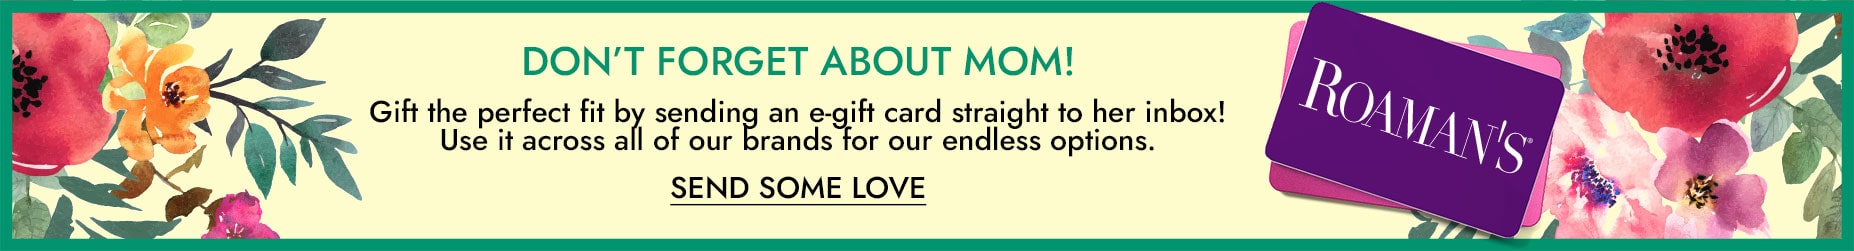 Don't forget about MOM's GIFT CARD